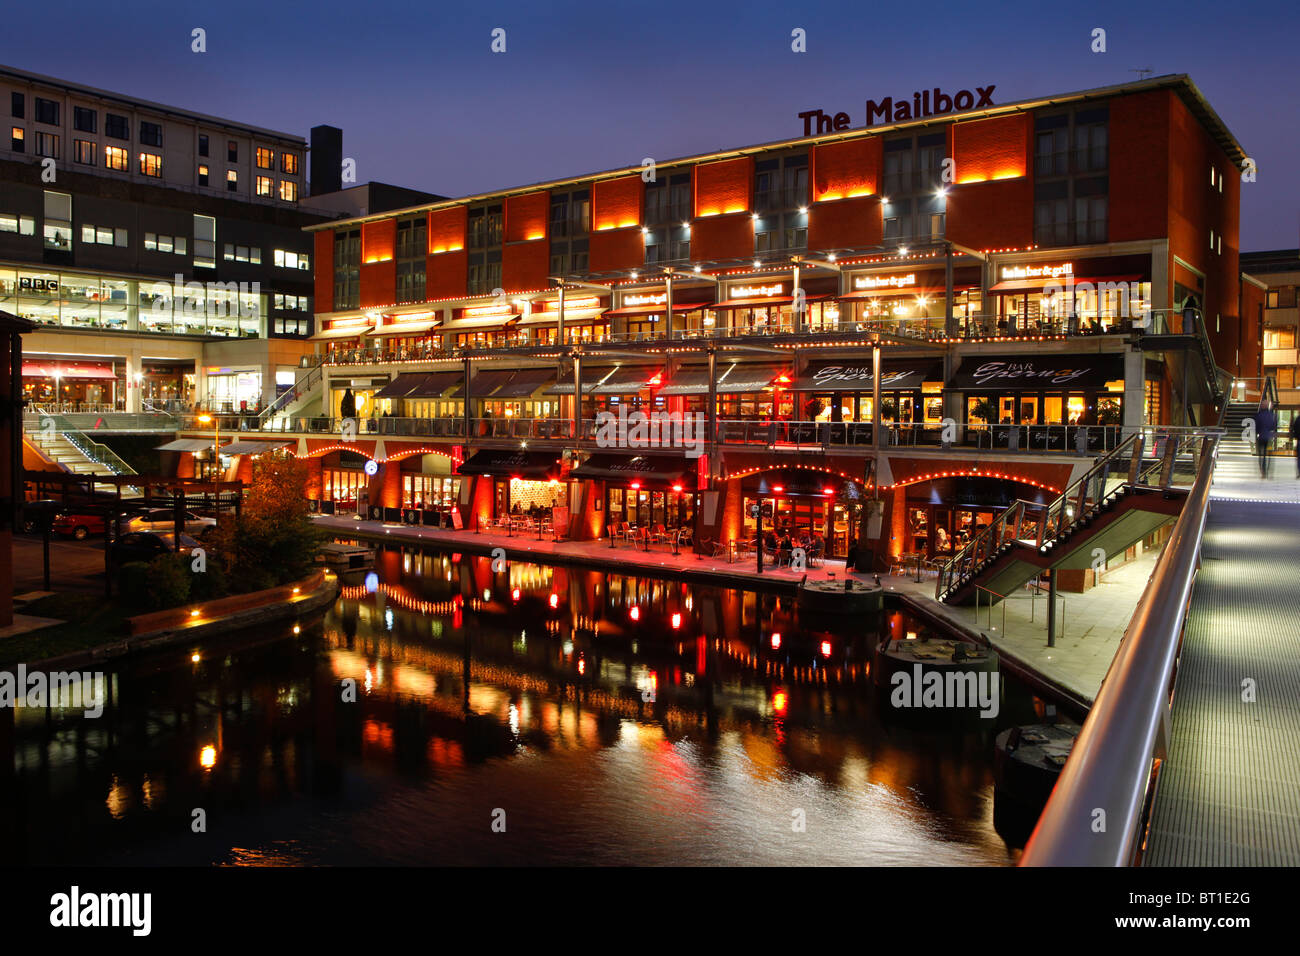 The Mailbox development at night, showing bars and restaurants along